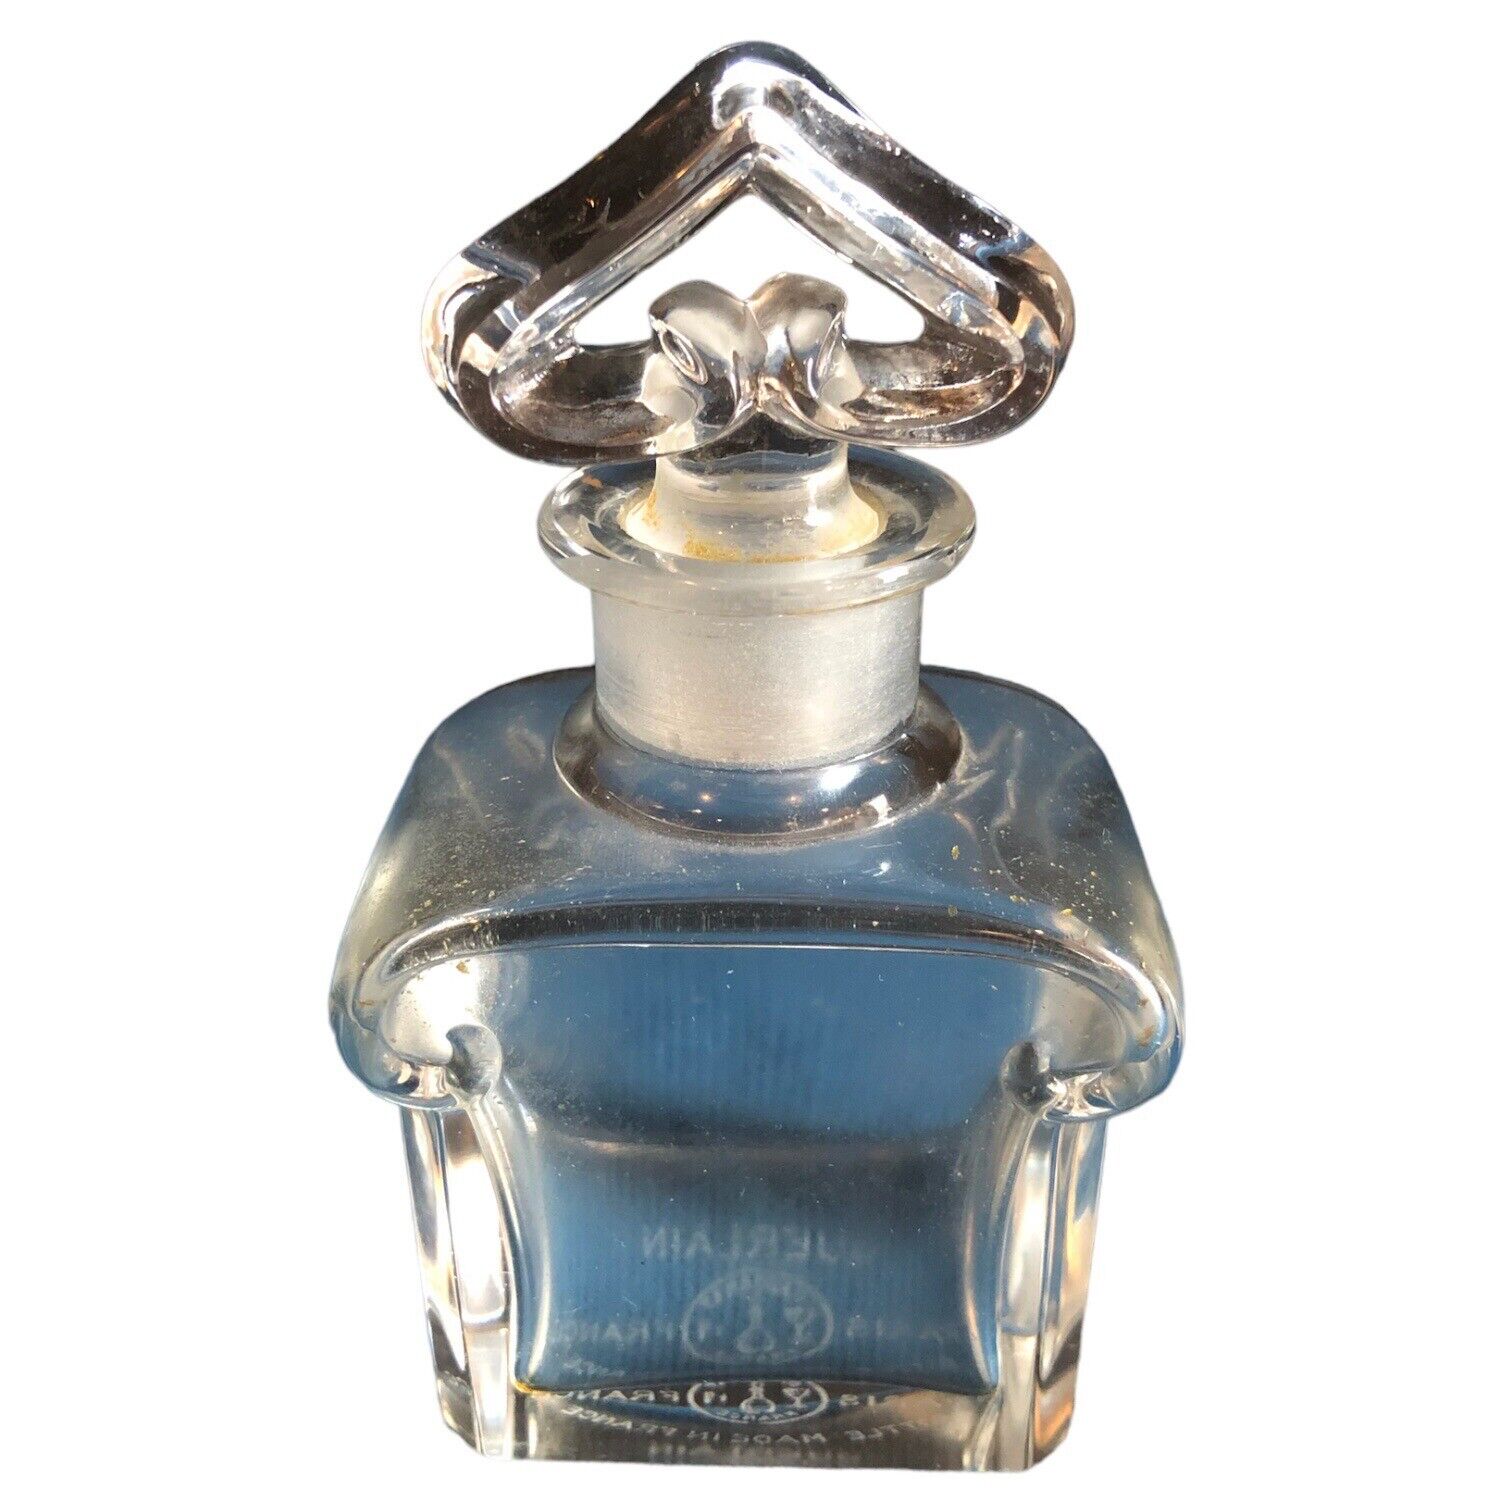 Vintage Guerlain Perfume Bottle by Baccarat Refillable With Glass Stopper